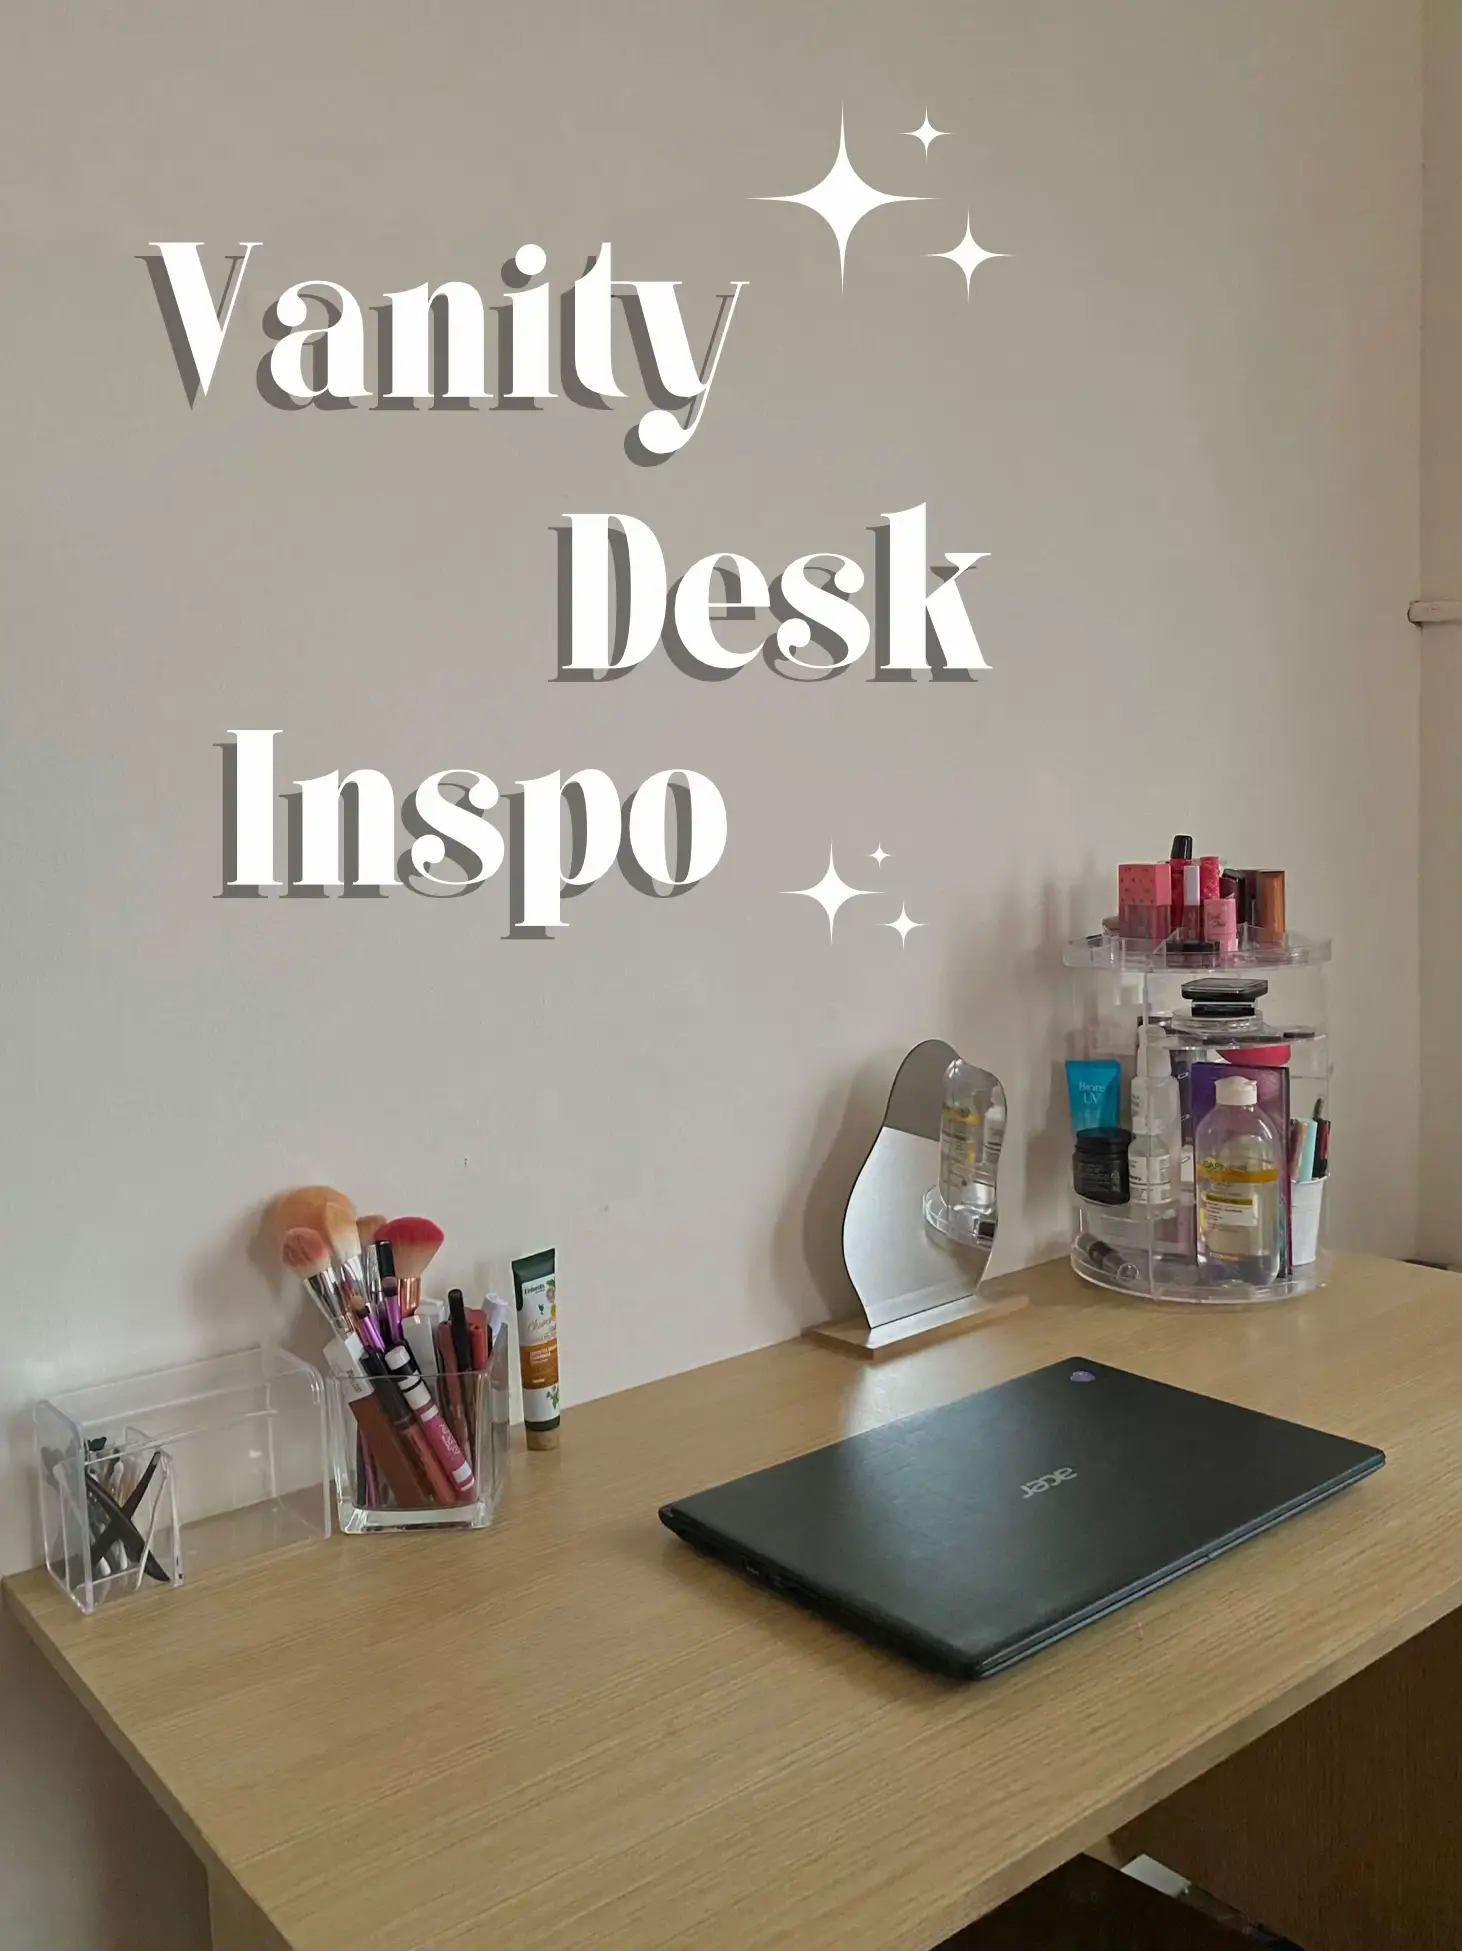 Vanity Desk Inspo🪞🧸, Gallery posted by bern